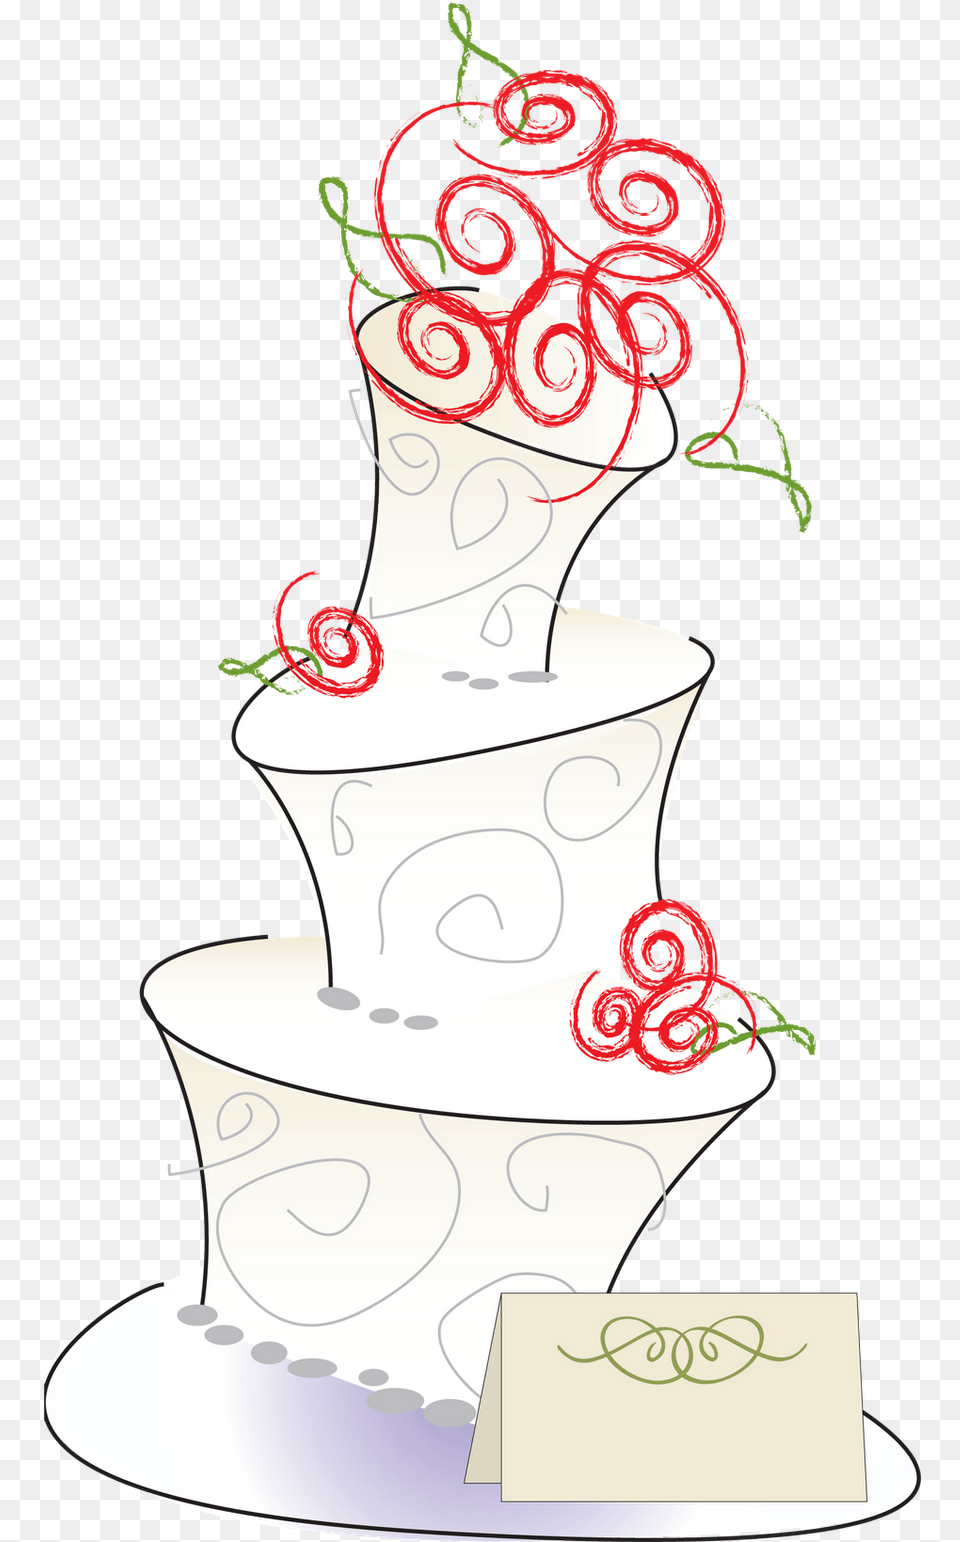 Wedding Clipart Red Whimsical Wedding Cake With Clip Art, Dessert, Food, Wedding Cake, Cream Png Image